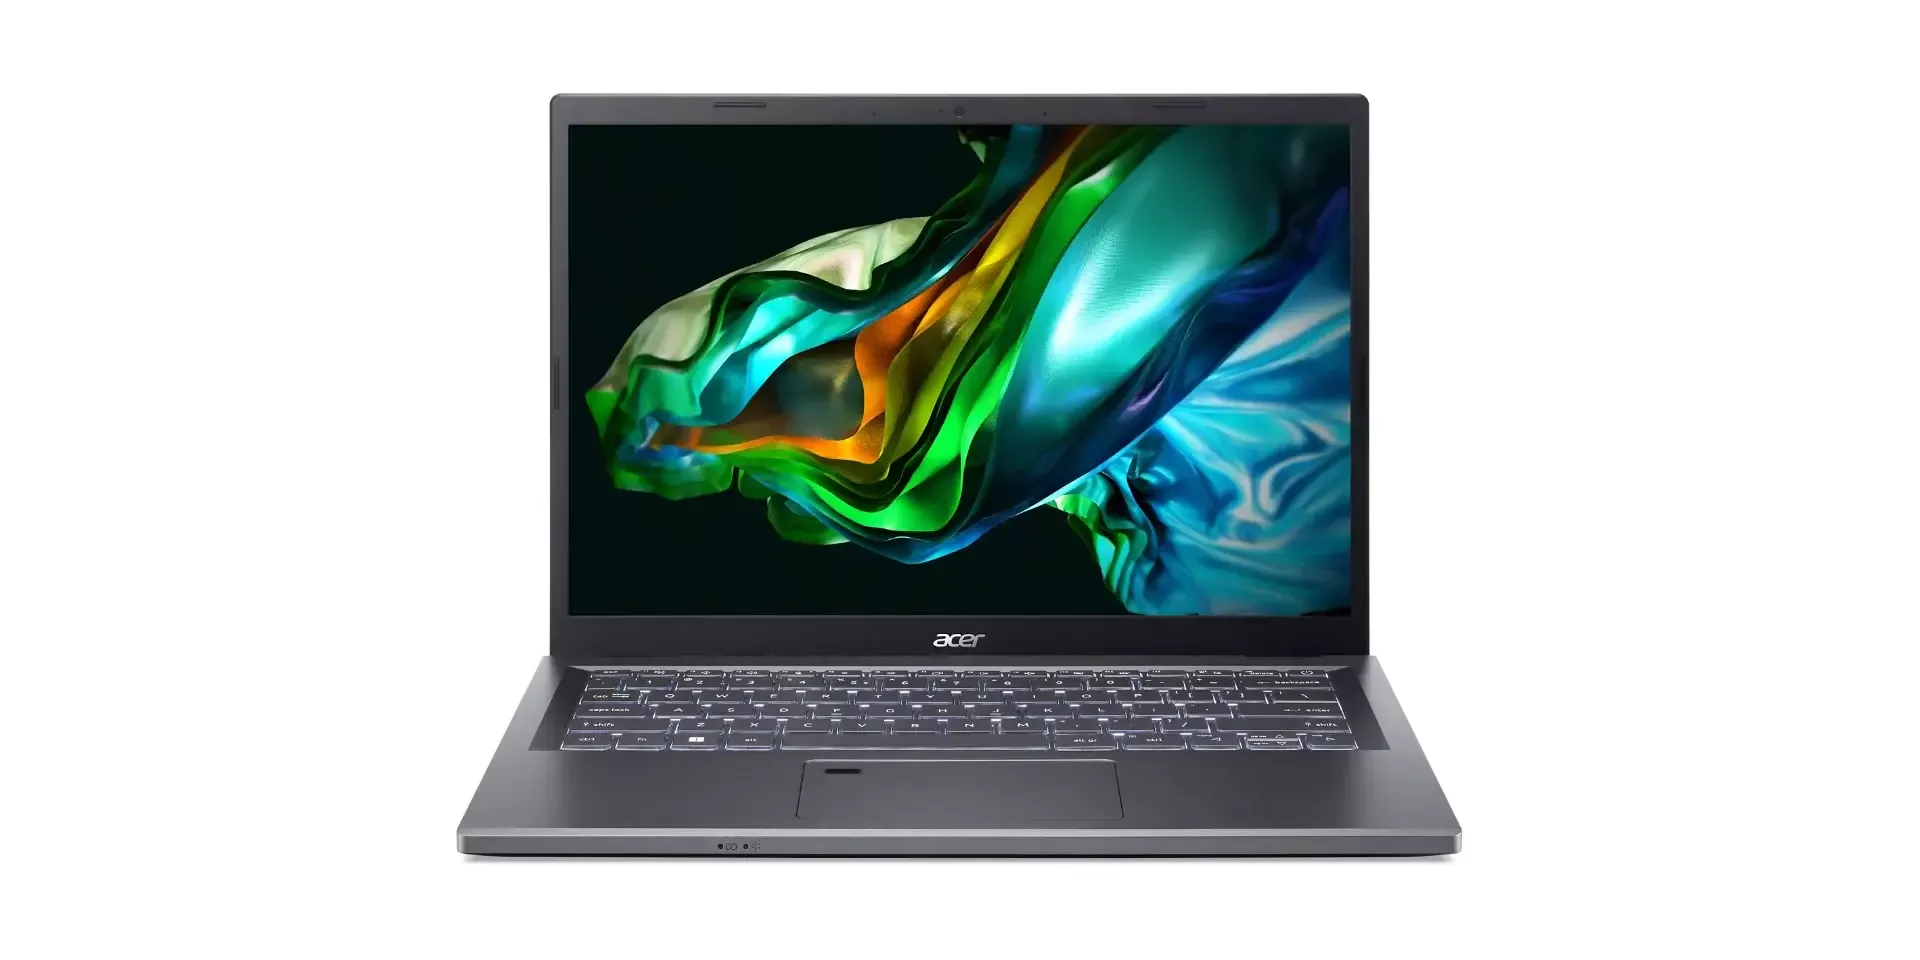 Acer Aspire 5 launched with Intel Core i5, RTX 2050 graphics at